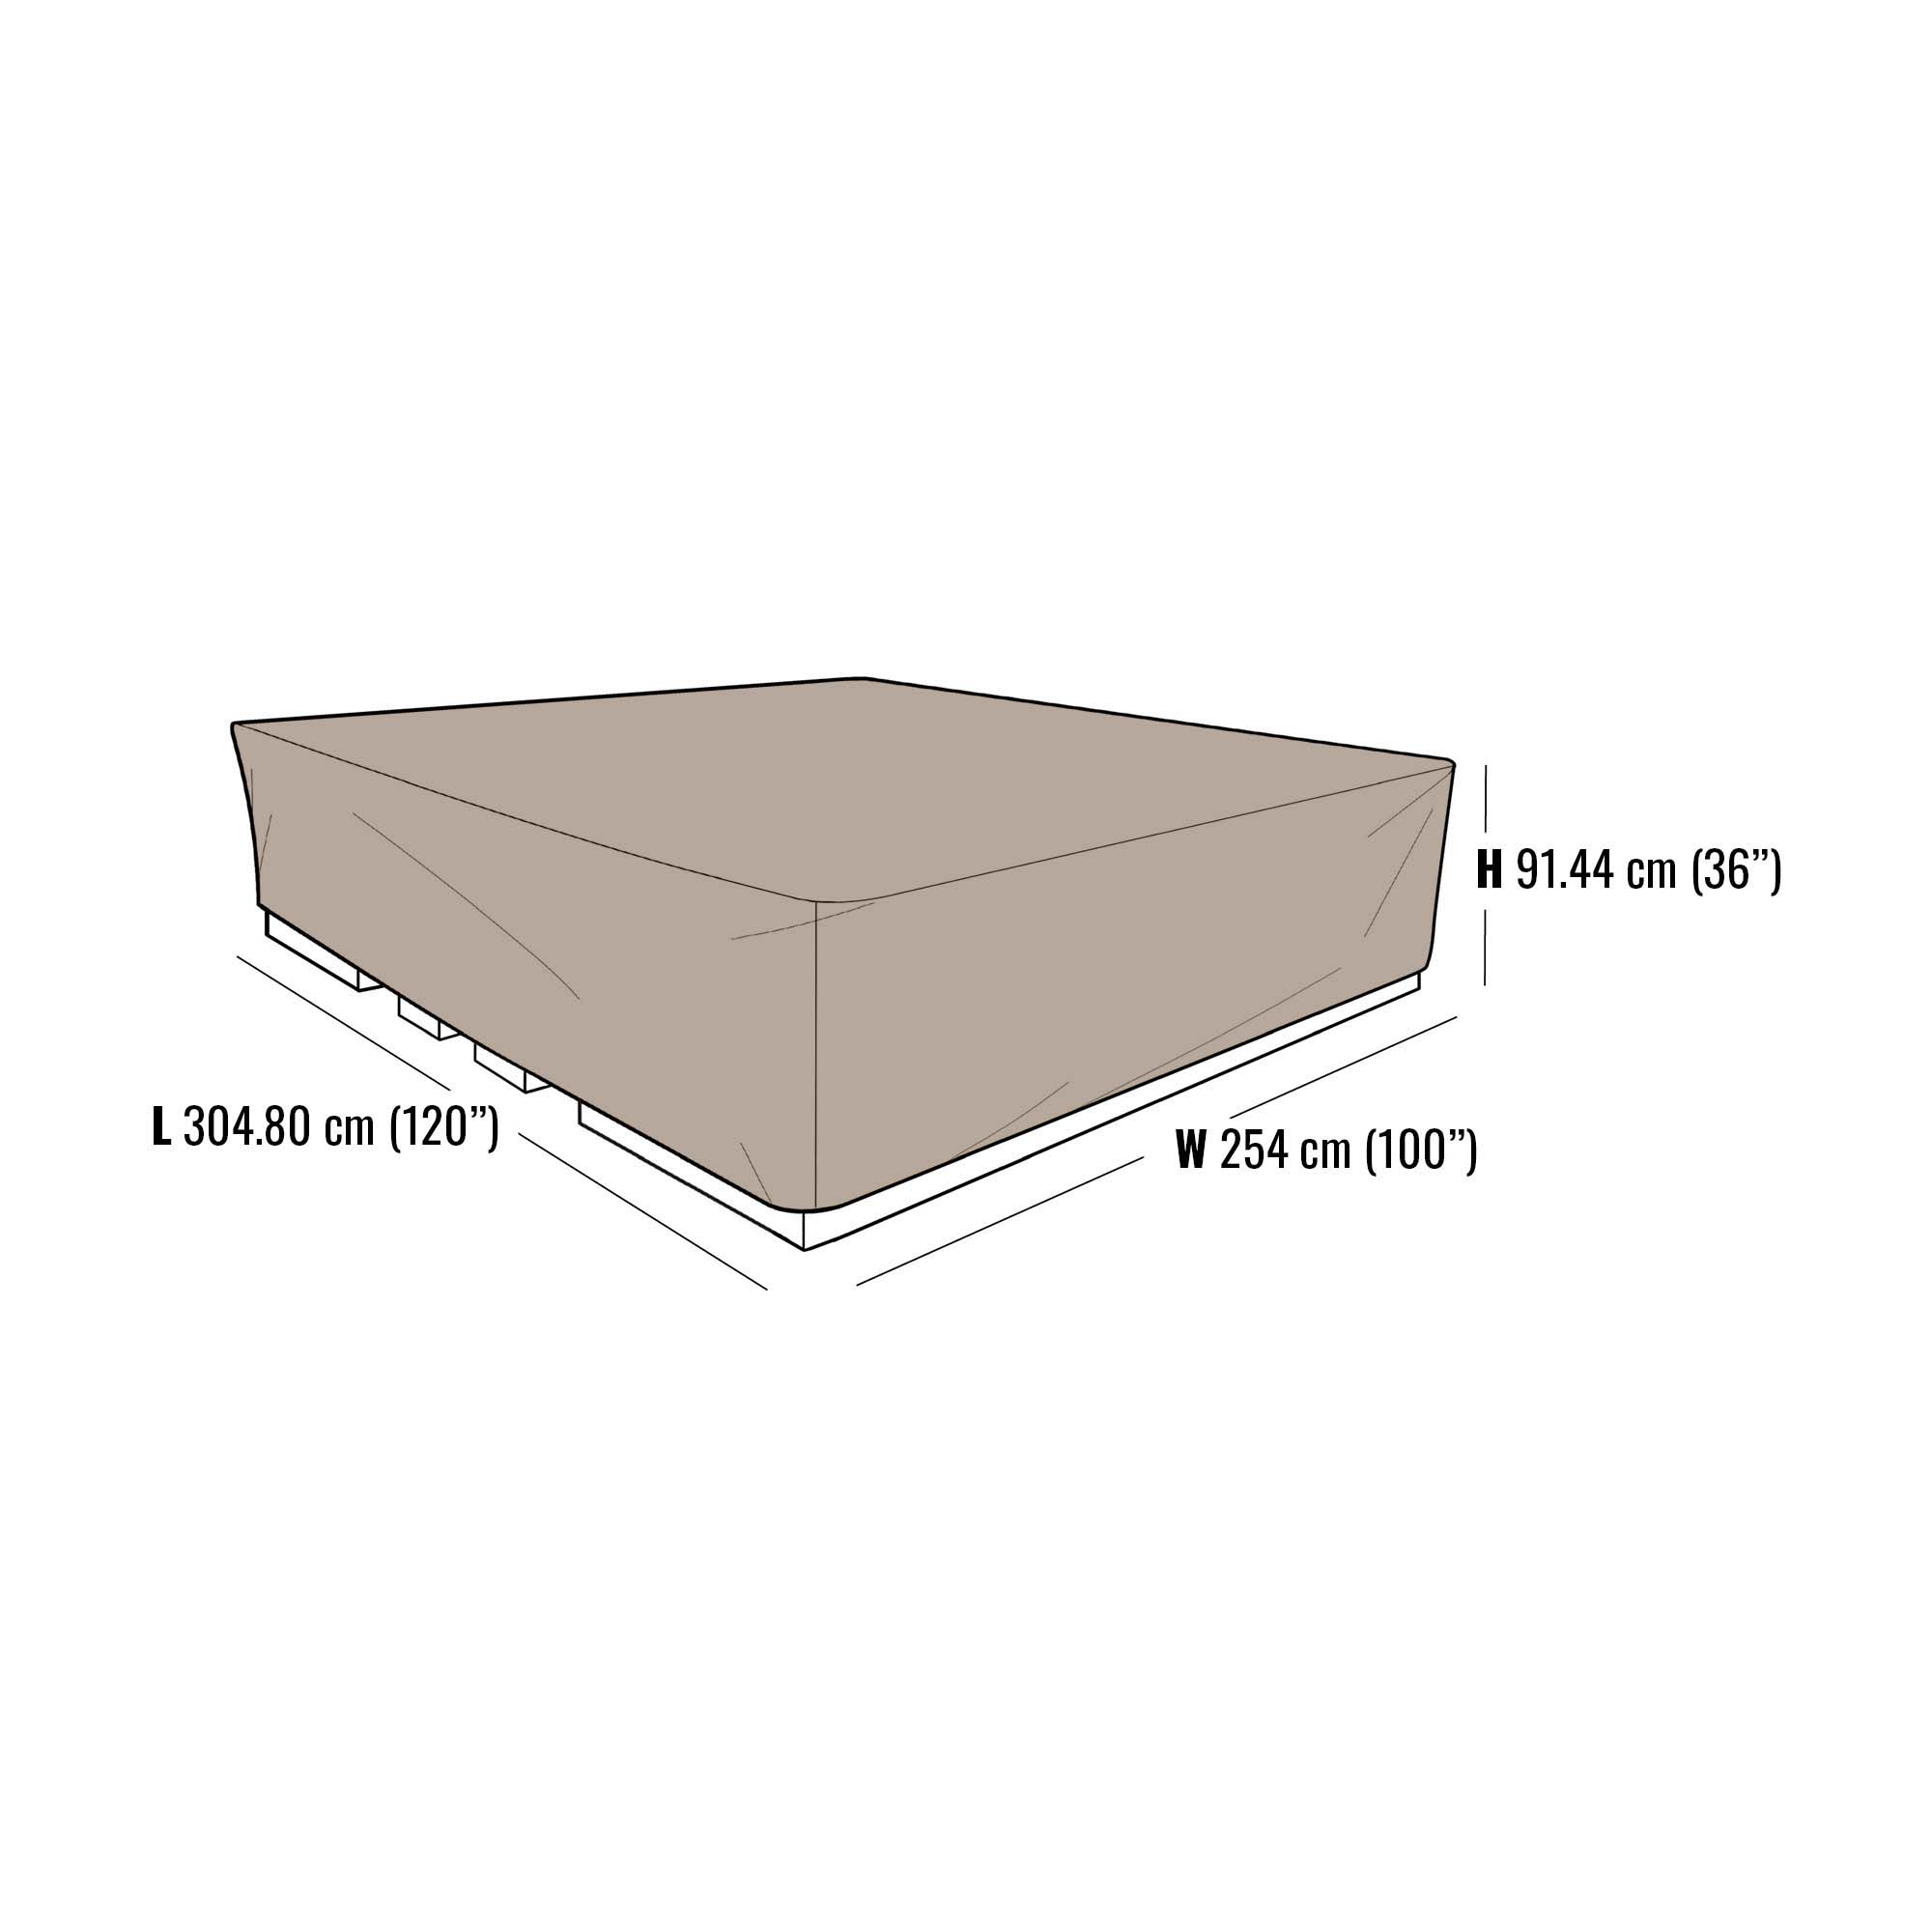 XLG Seating Group Furniture Cover